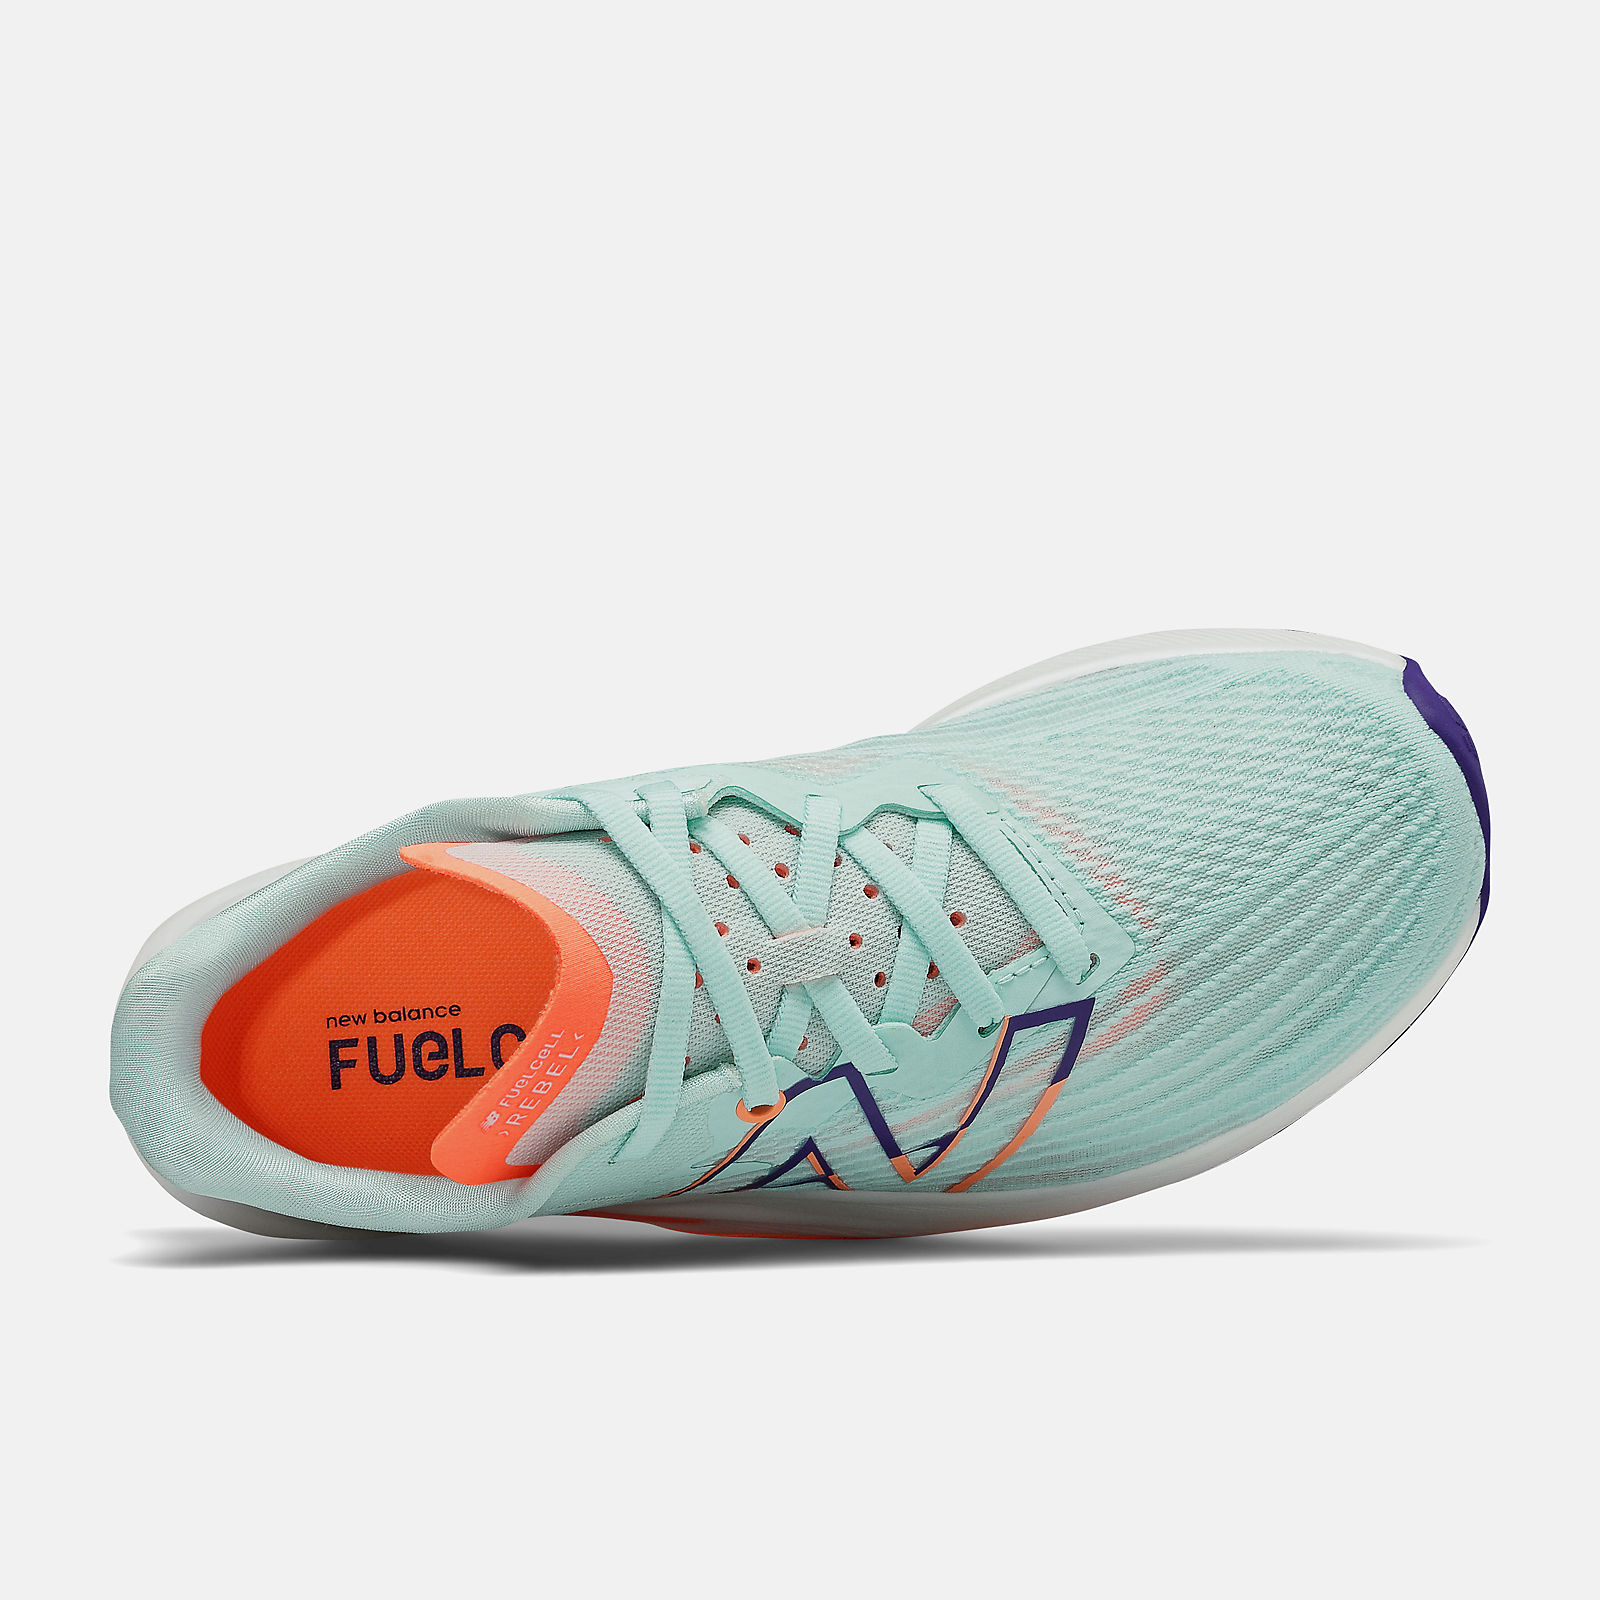 FuelCell Rebel v2 - New Balance